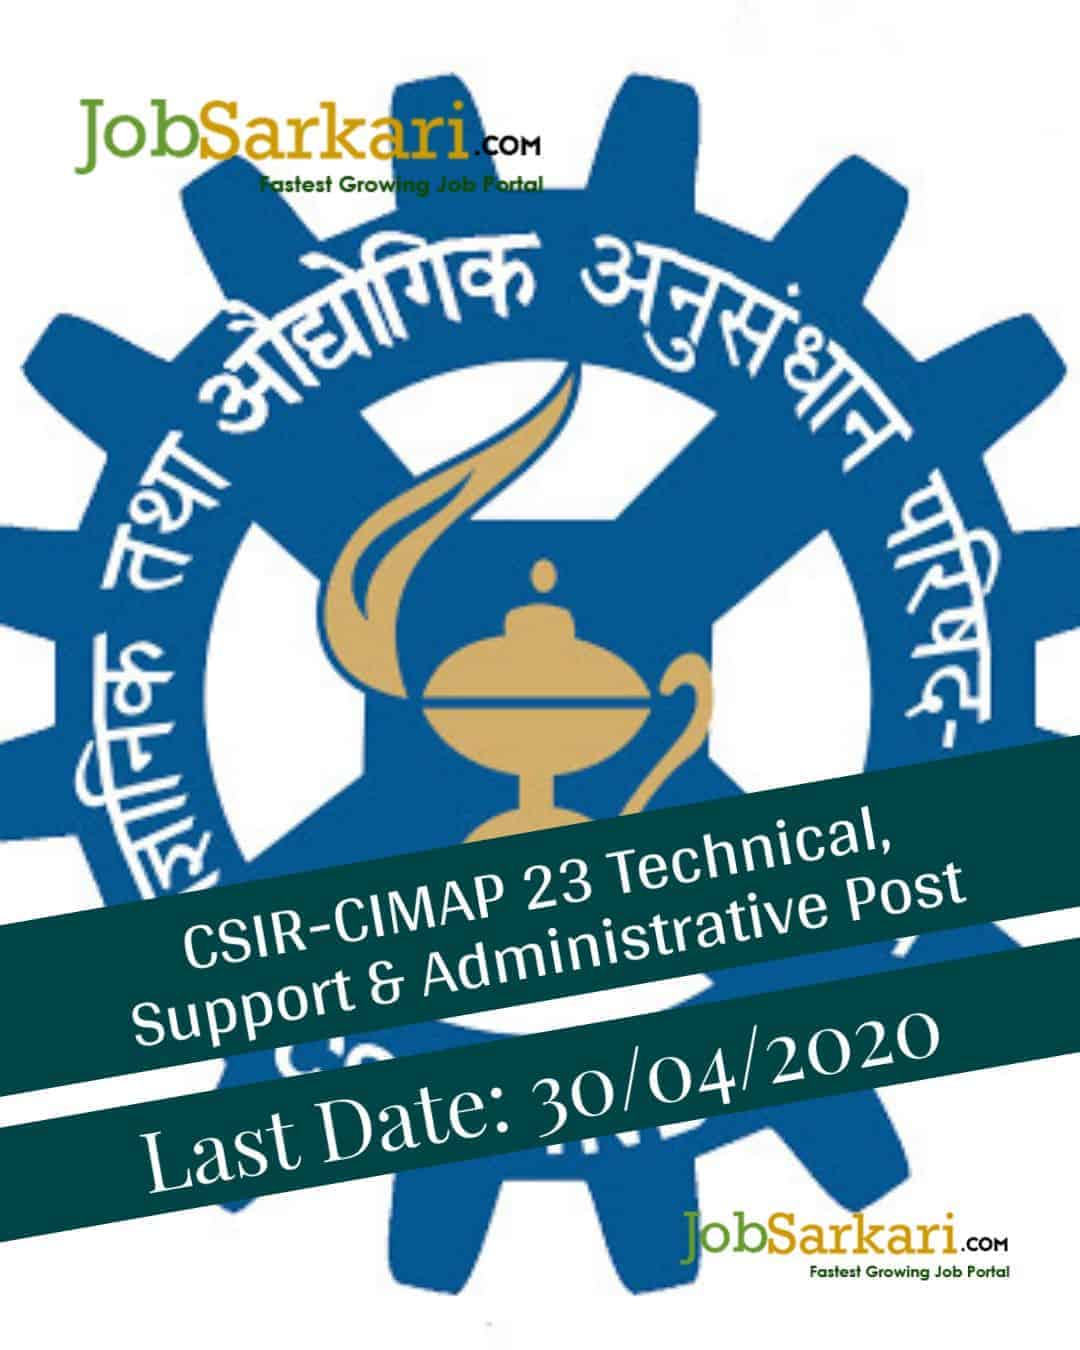 CSIR-CIMAP 23 Technical, Support & Administrative Post 1